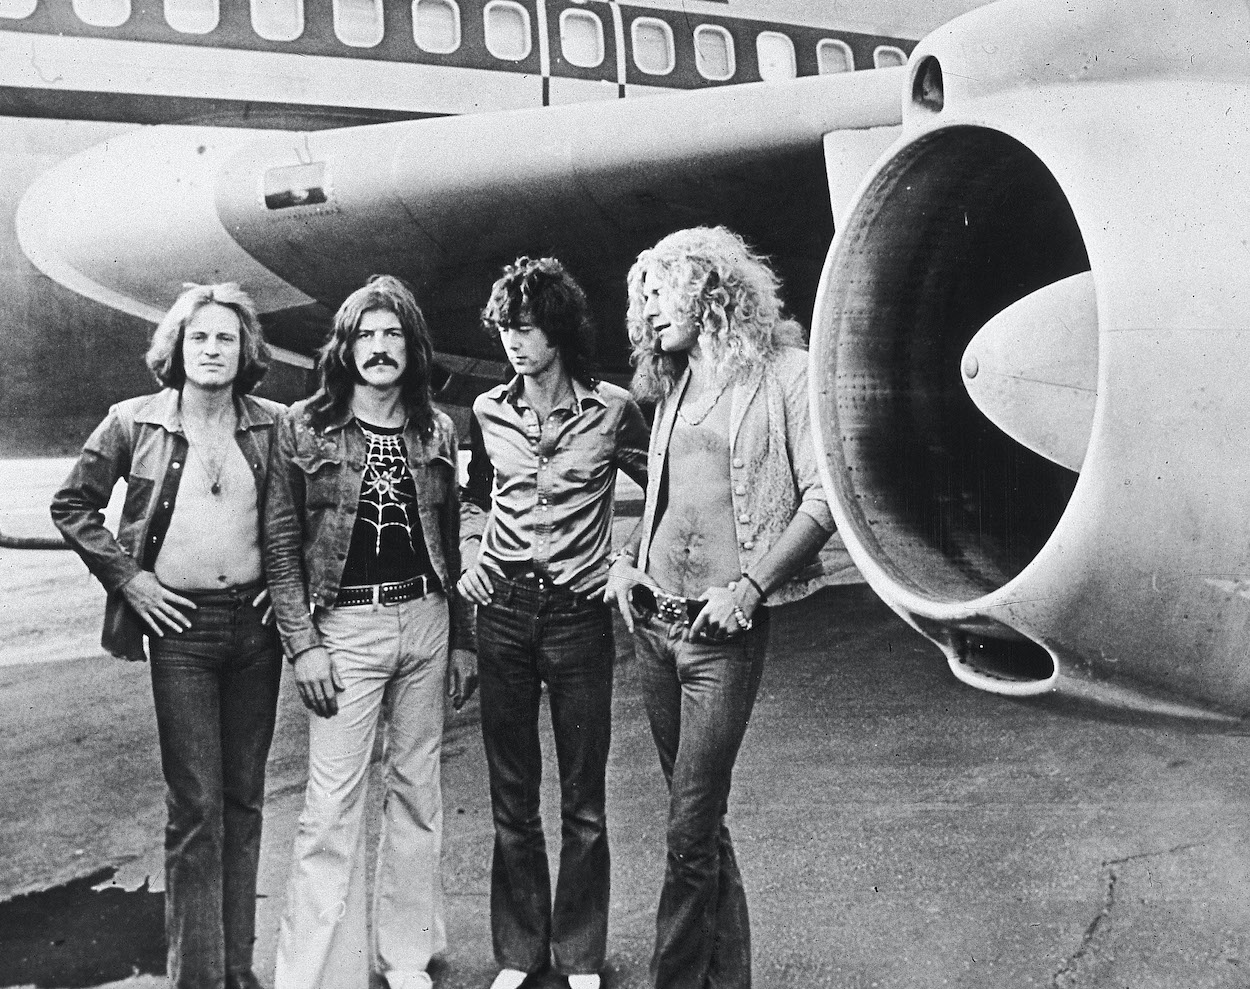 John Paul Jones (from left), John Bonham, Jimmy Page and Robert Plant stand next to Led Zeppelin's plane called The Starship, which they did not own.